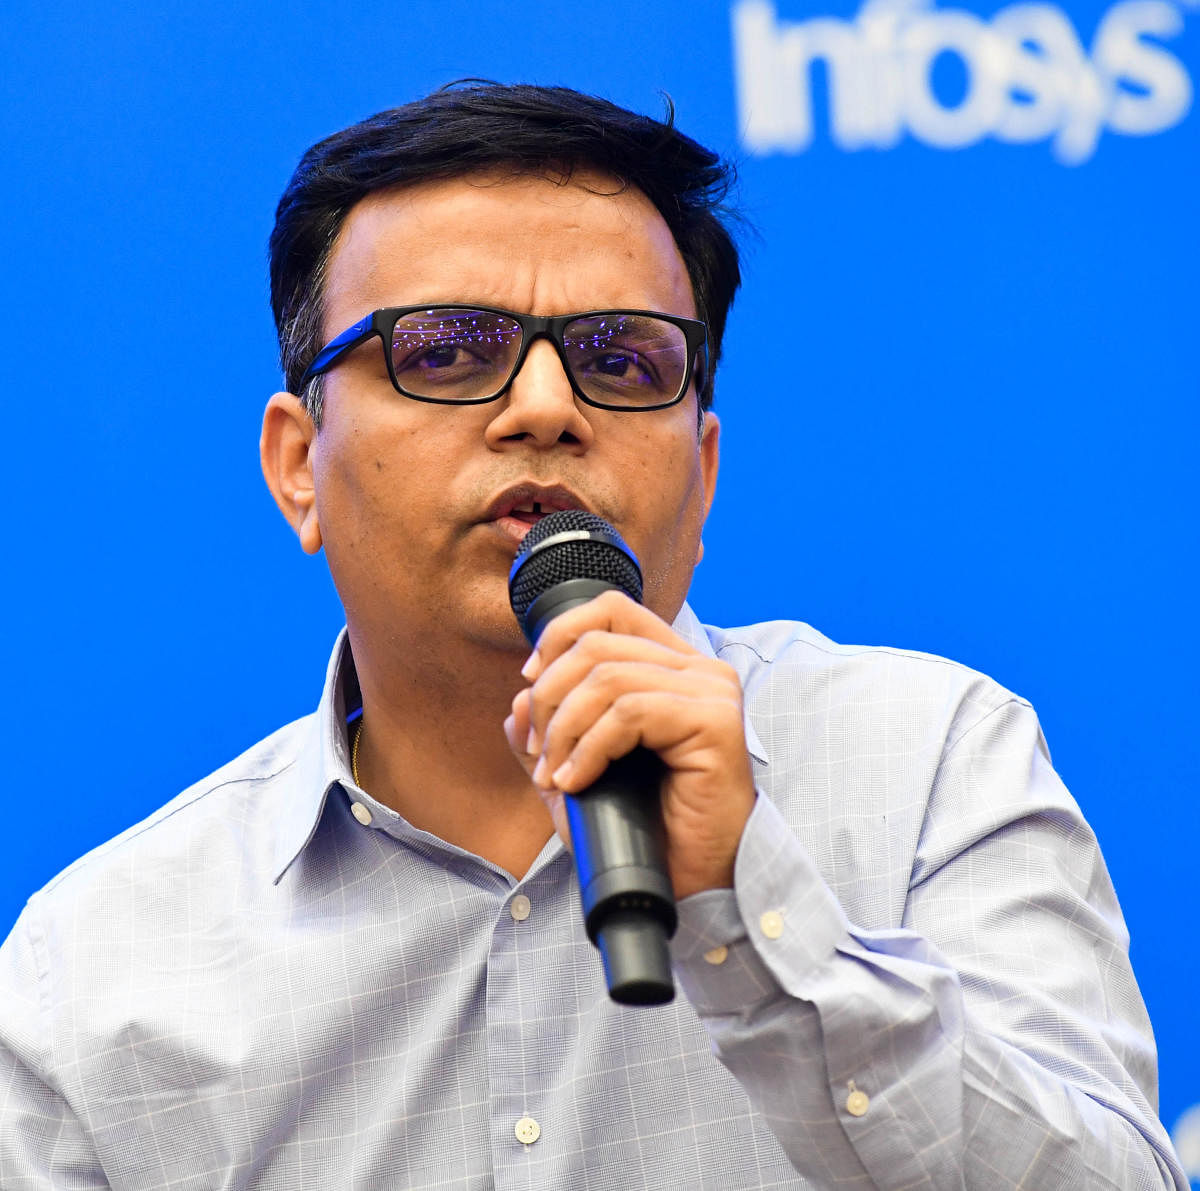 DH Exclusive: Infosys retains Dy CFO amid speculations